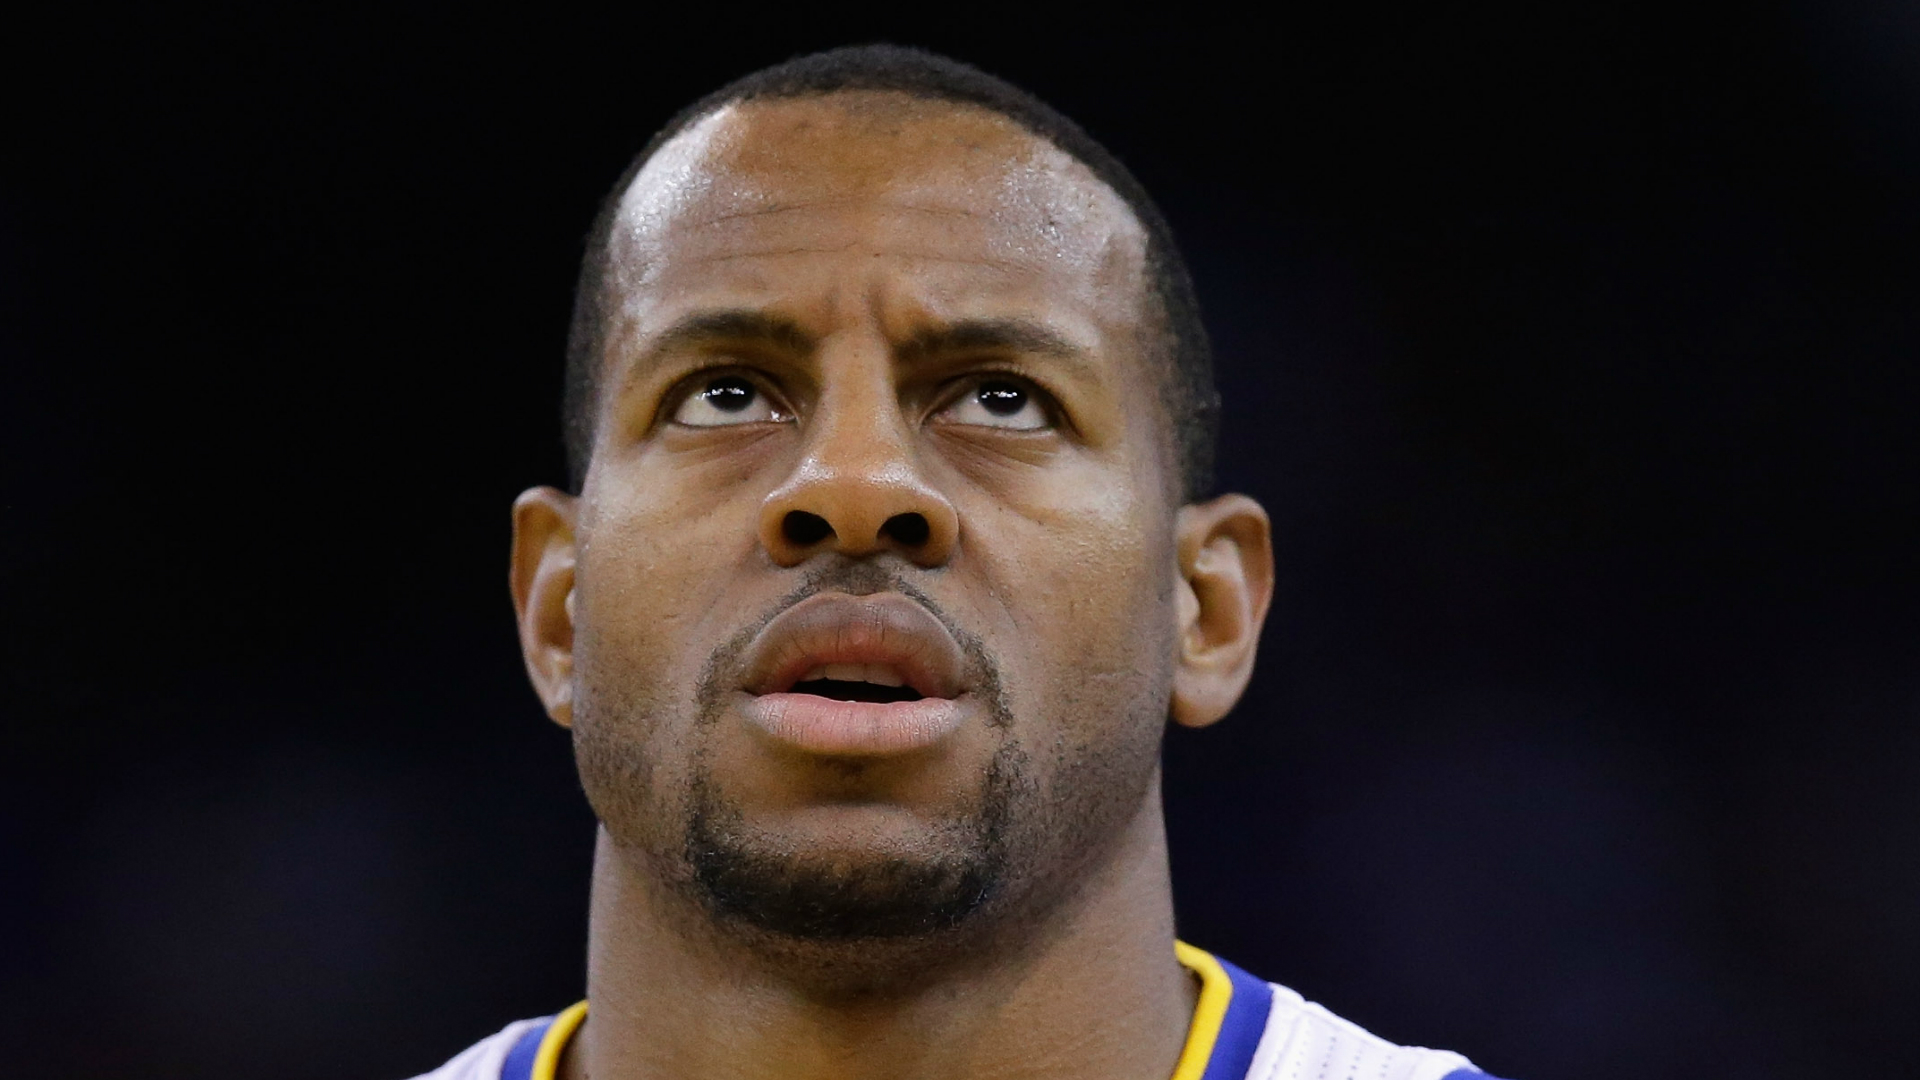 Andre Iguodala brings the sass on Twitter about being traded | NBA | Sporting News